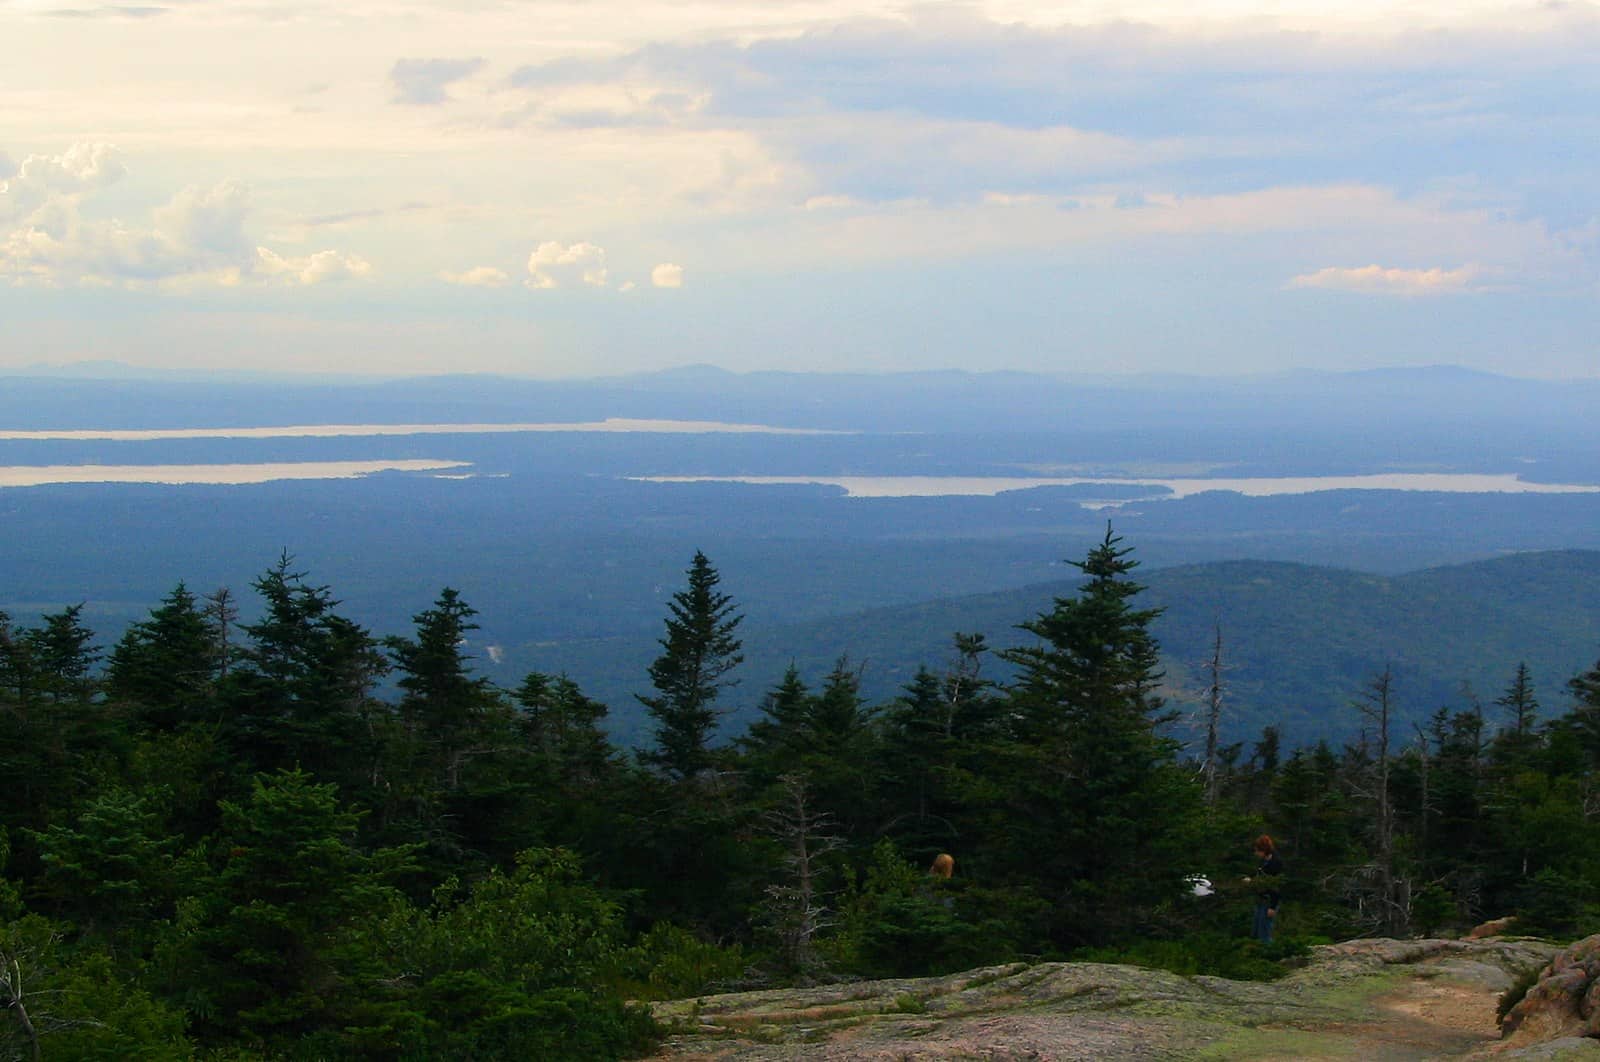 view of trees, water, and mountains in Acadia National Park